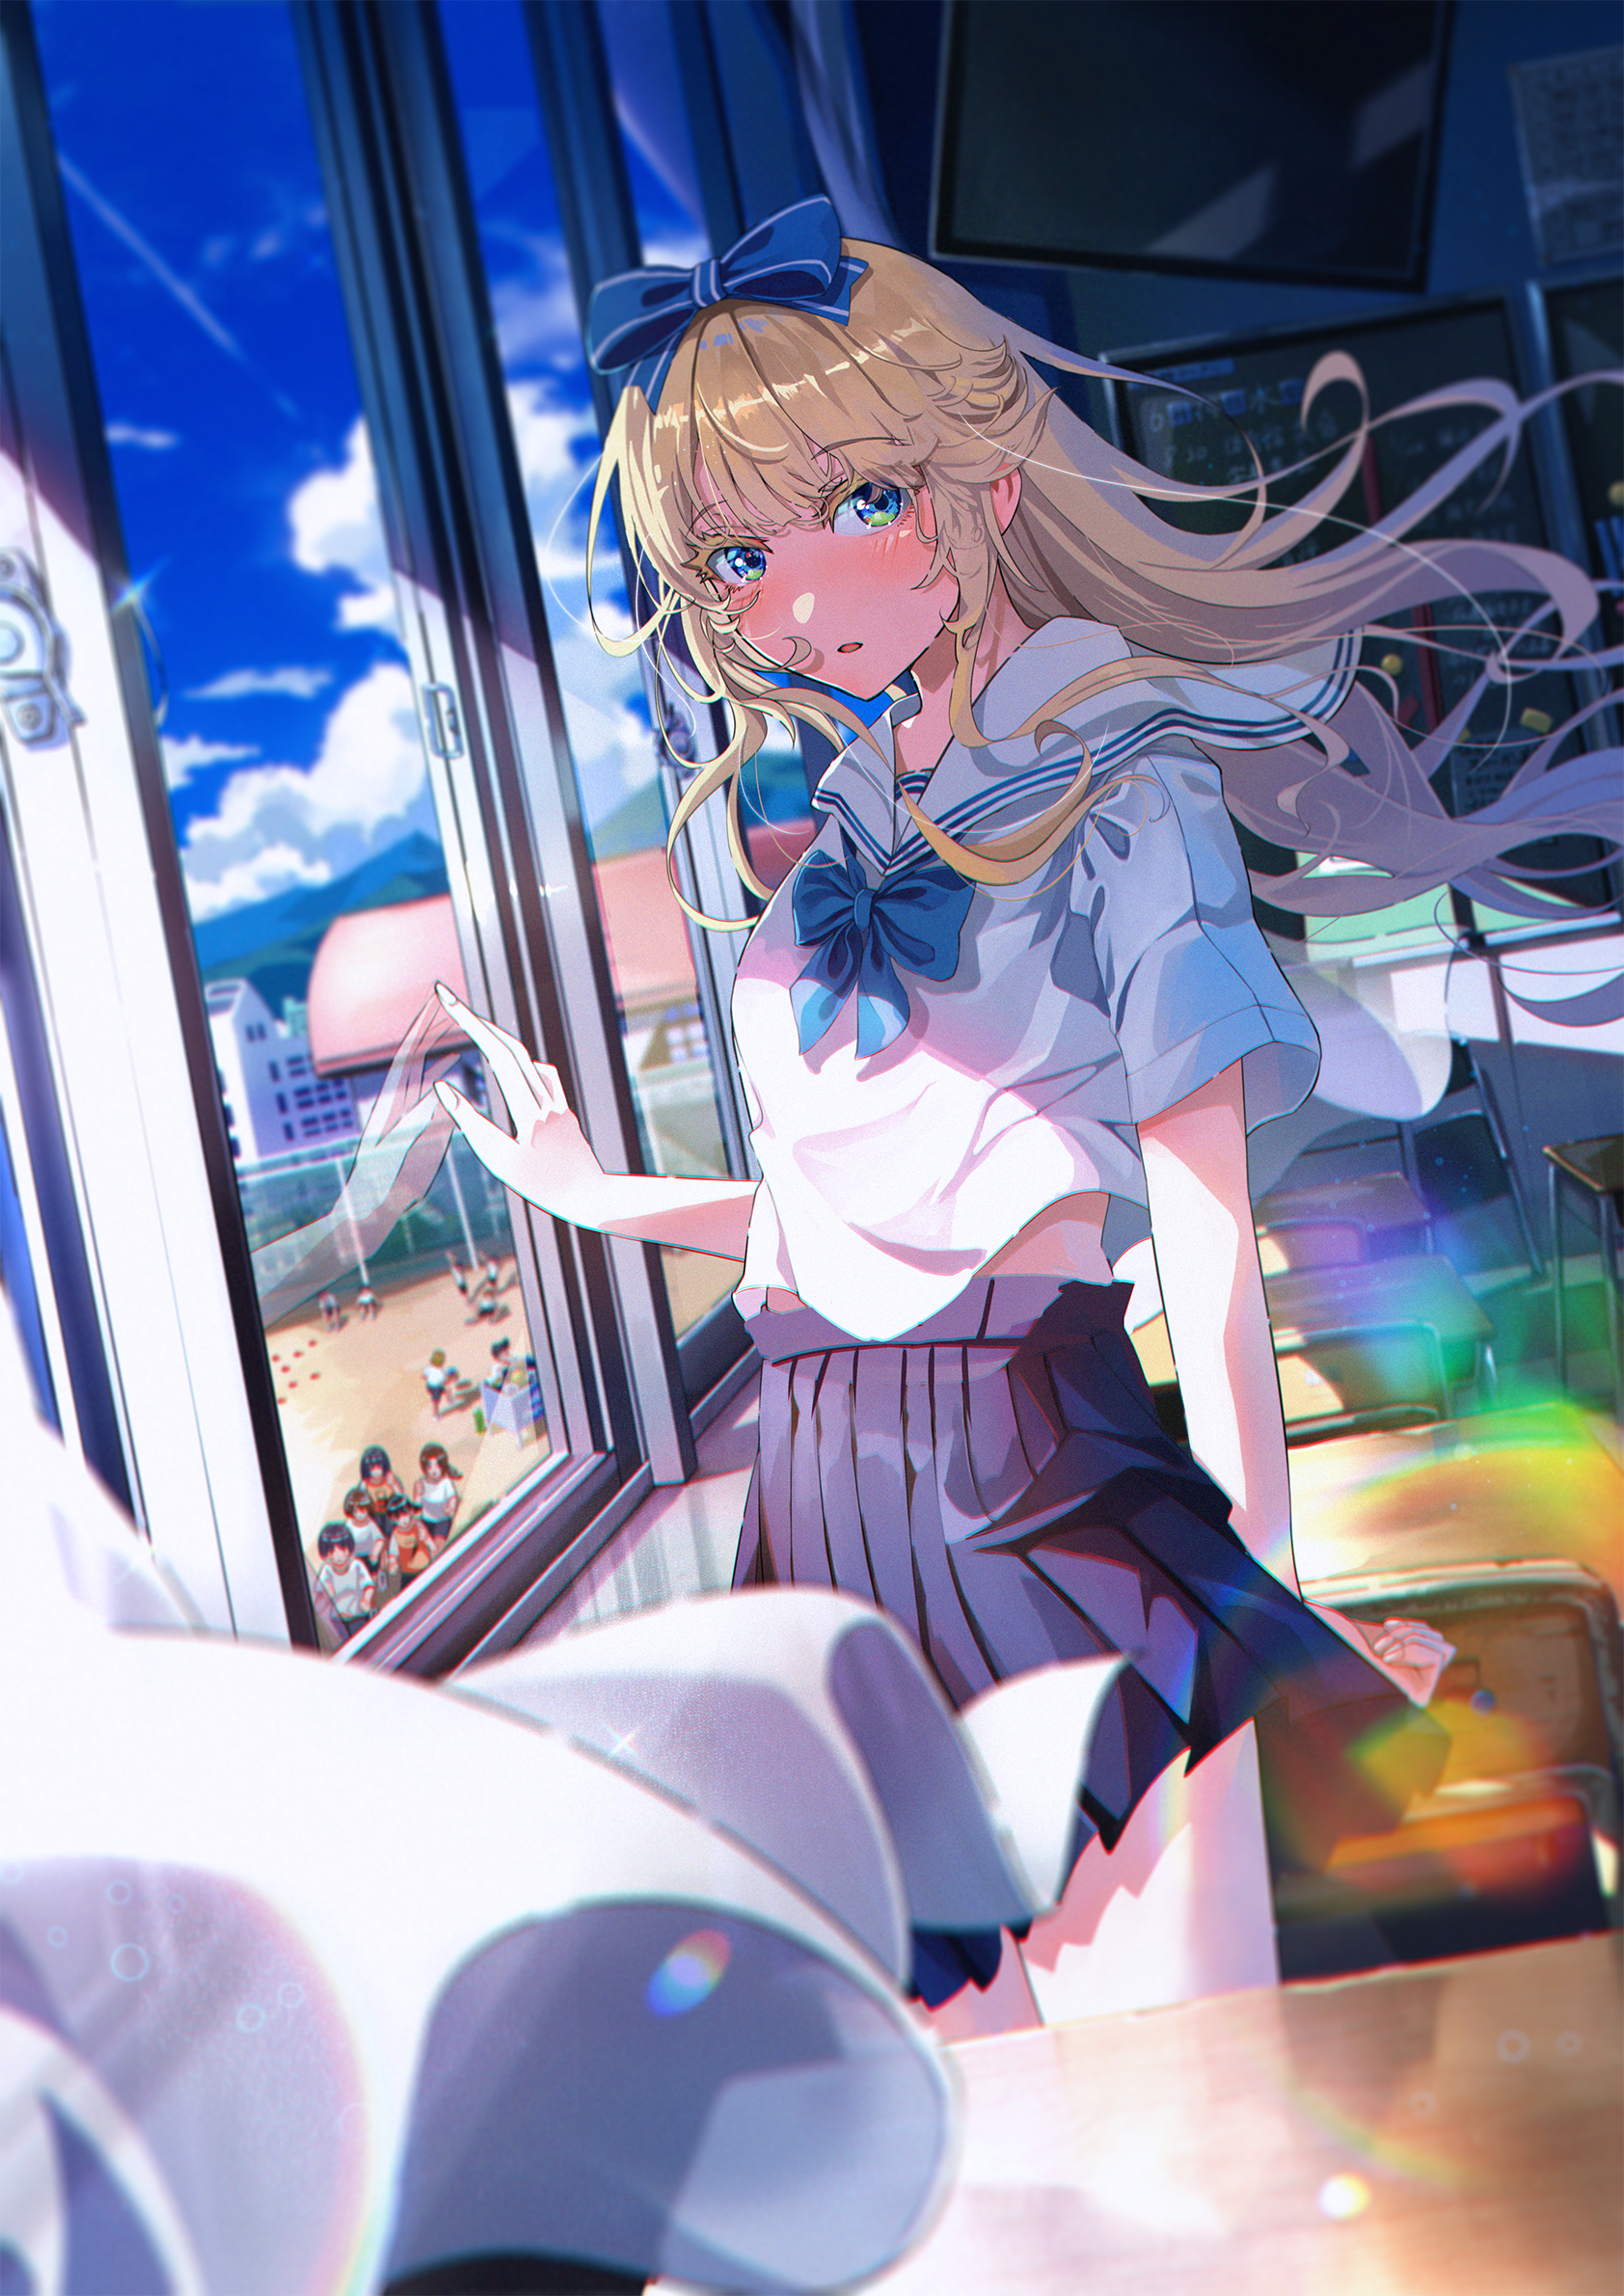 Anime 1684x2381 anime anime girls Sakatsuki Yakumo clouds schoolgirl school uniform hair blowing in the wind bow chair desk looking at viewer standing classroom chalkboard long hair hair bows curtains sunlight by the window window TV sky blue eyes blonde arm(s) behind back multi-colored eyes skirt reflection contrails parted lips bow tie blushing sailor uniform frills portrait display